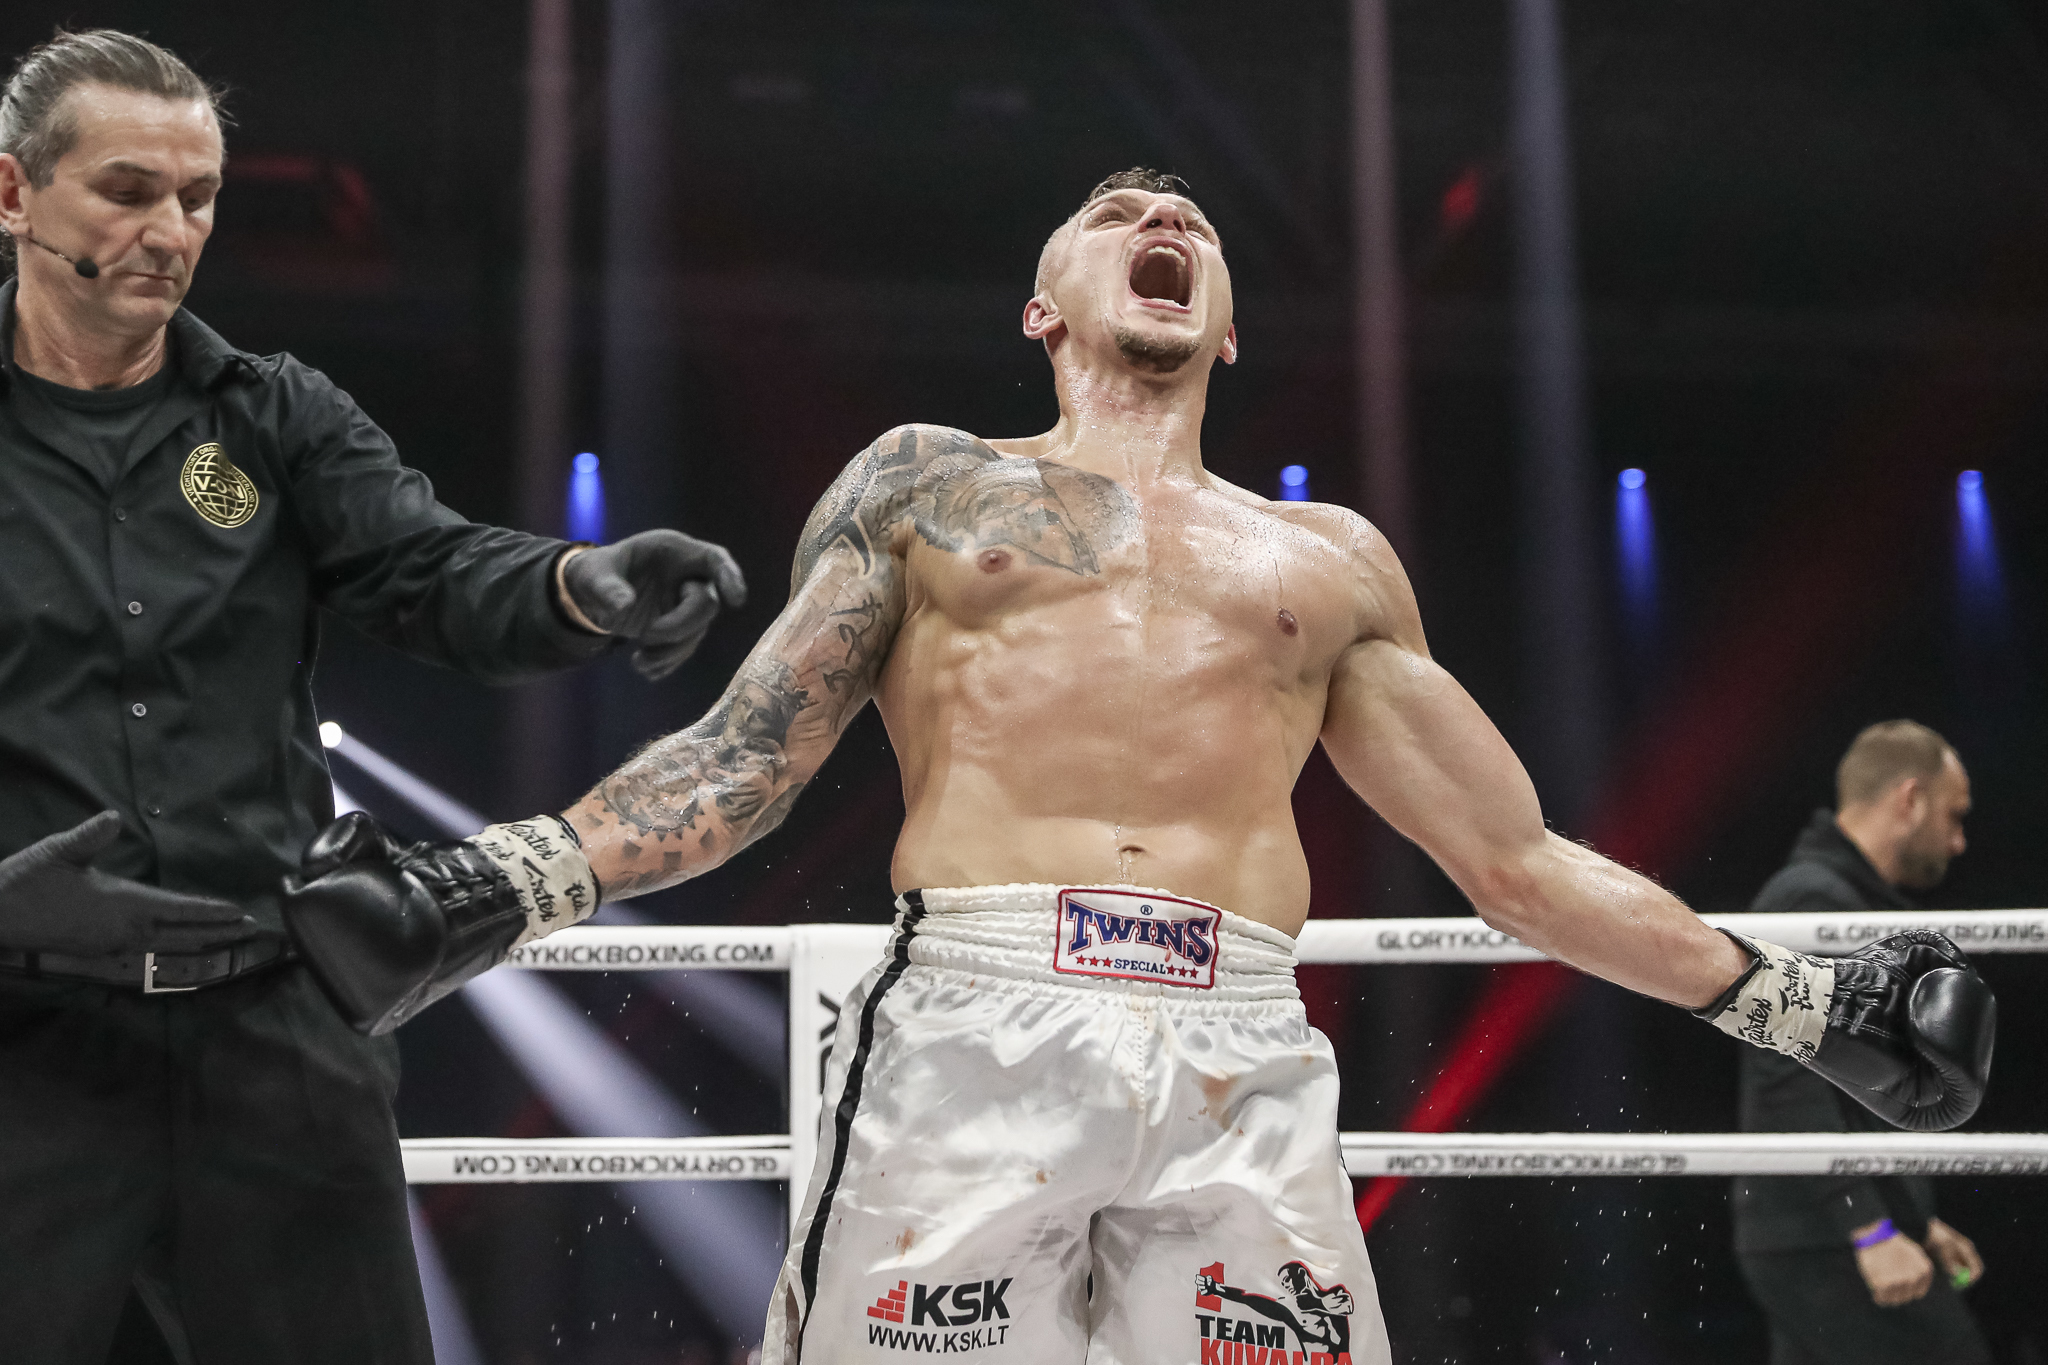 Sergej Maslobojev: "Becoming champion is my life goal right now"